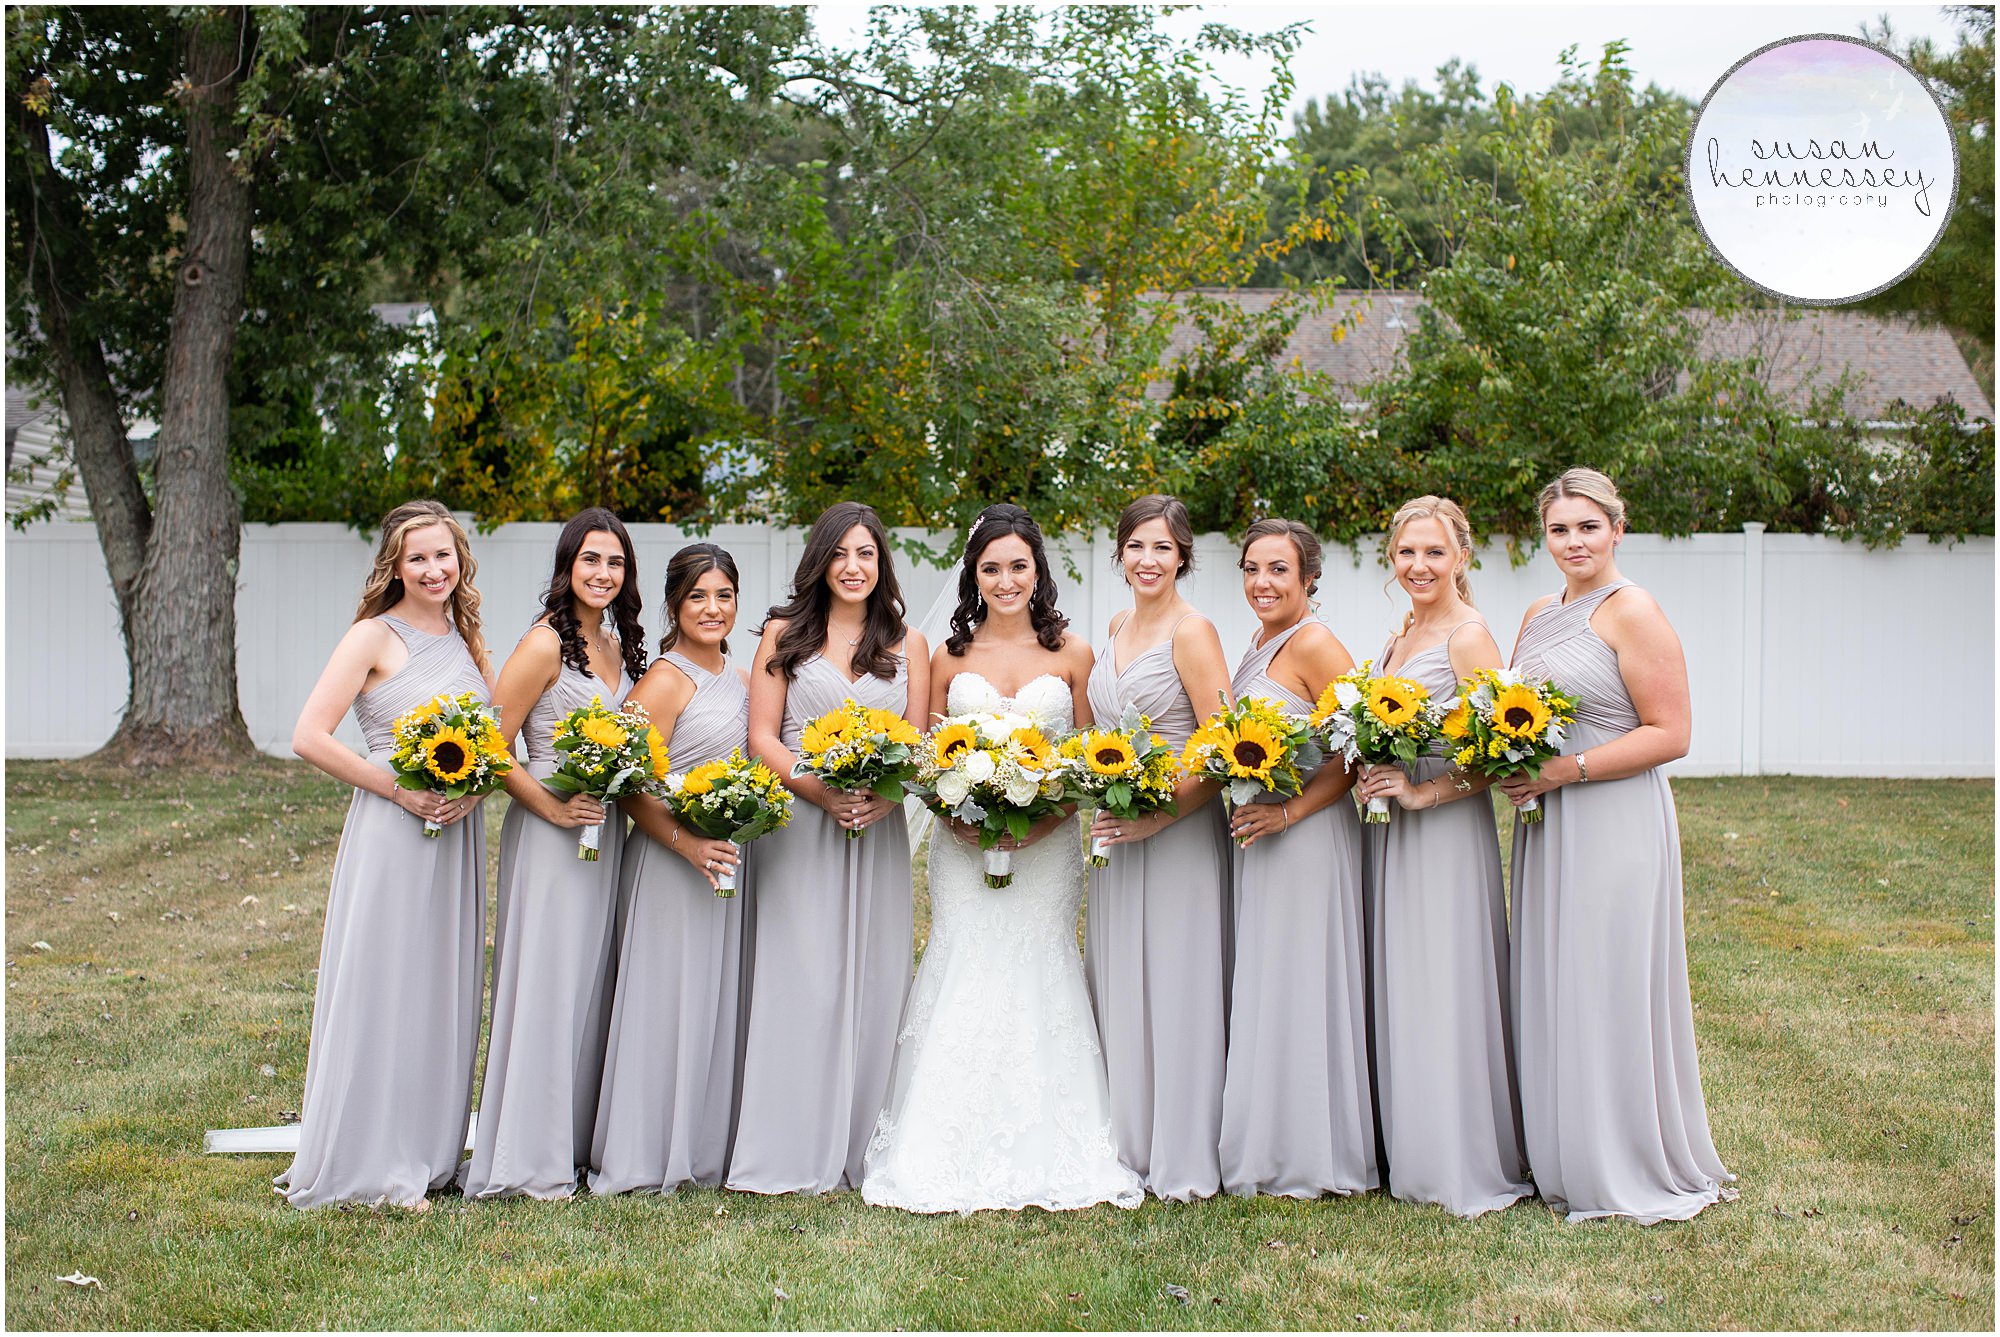 Bride and bridesmaids pose before ceremony